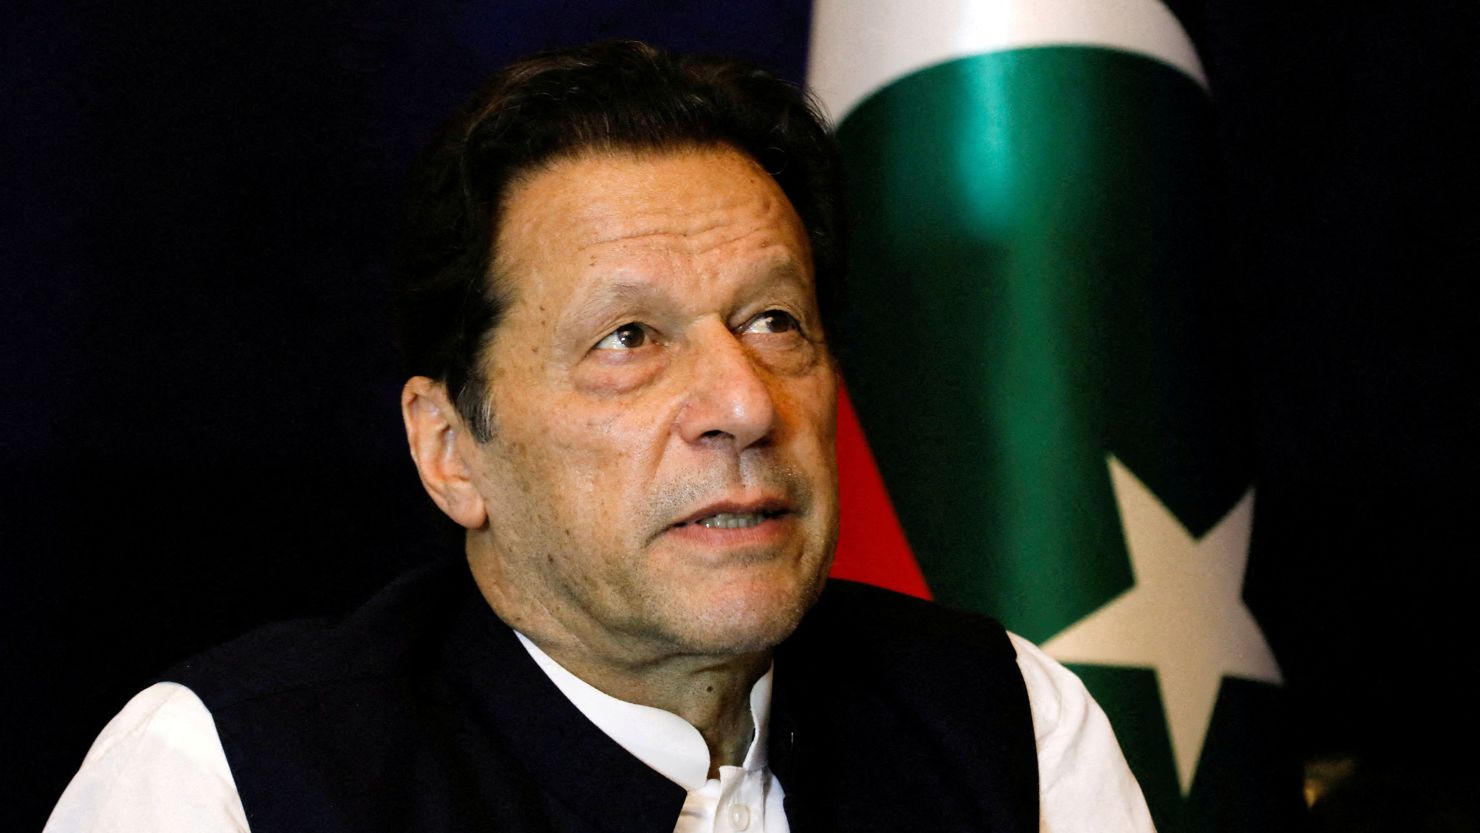 Former Pakistani Prime Minister Imran Khan is seen at an interview in Lahore, Pakistan on March 17, 2023.